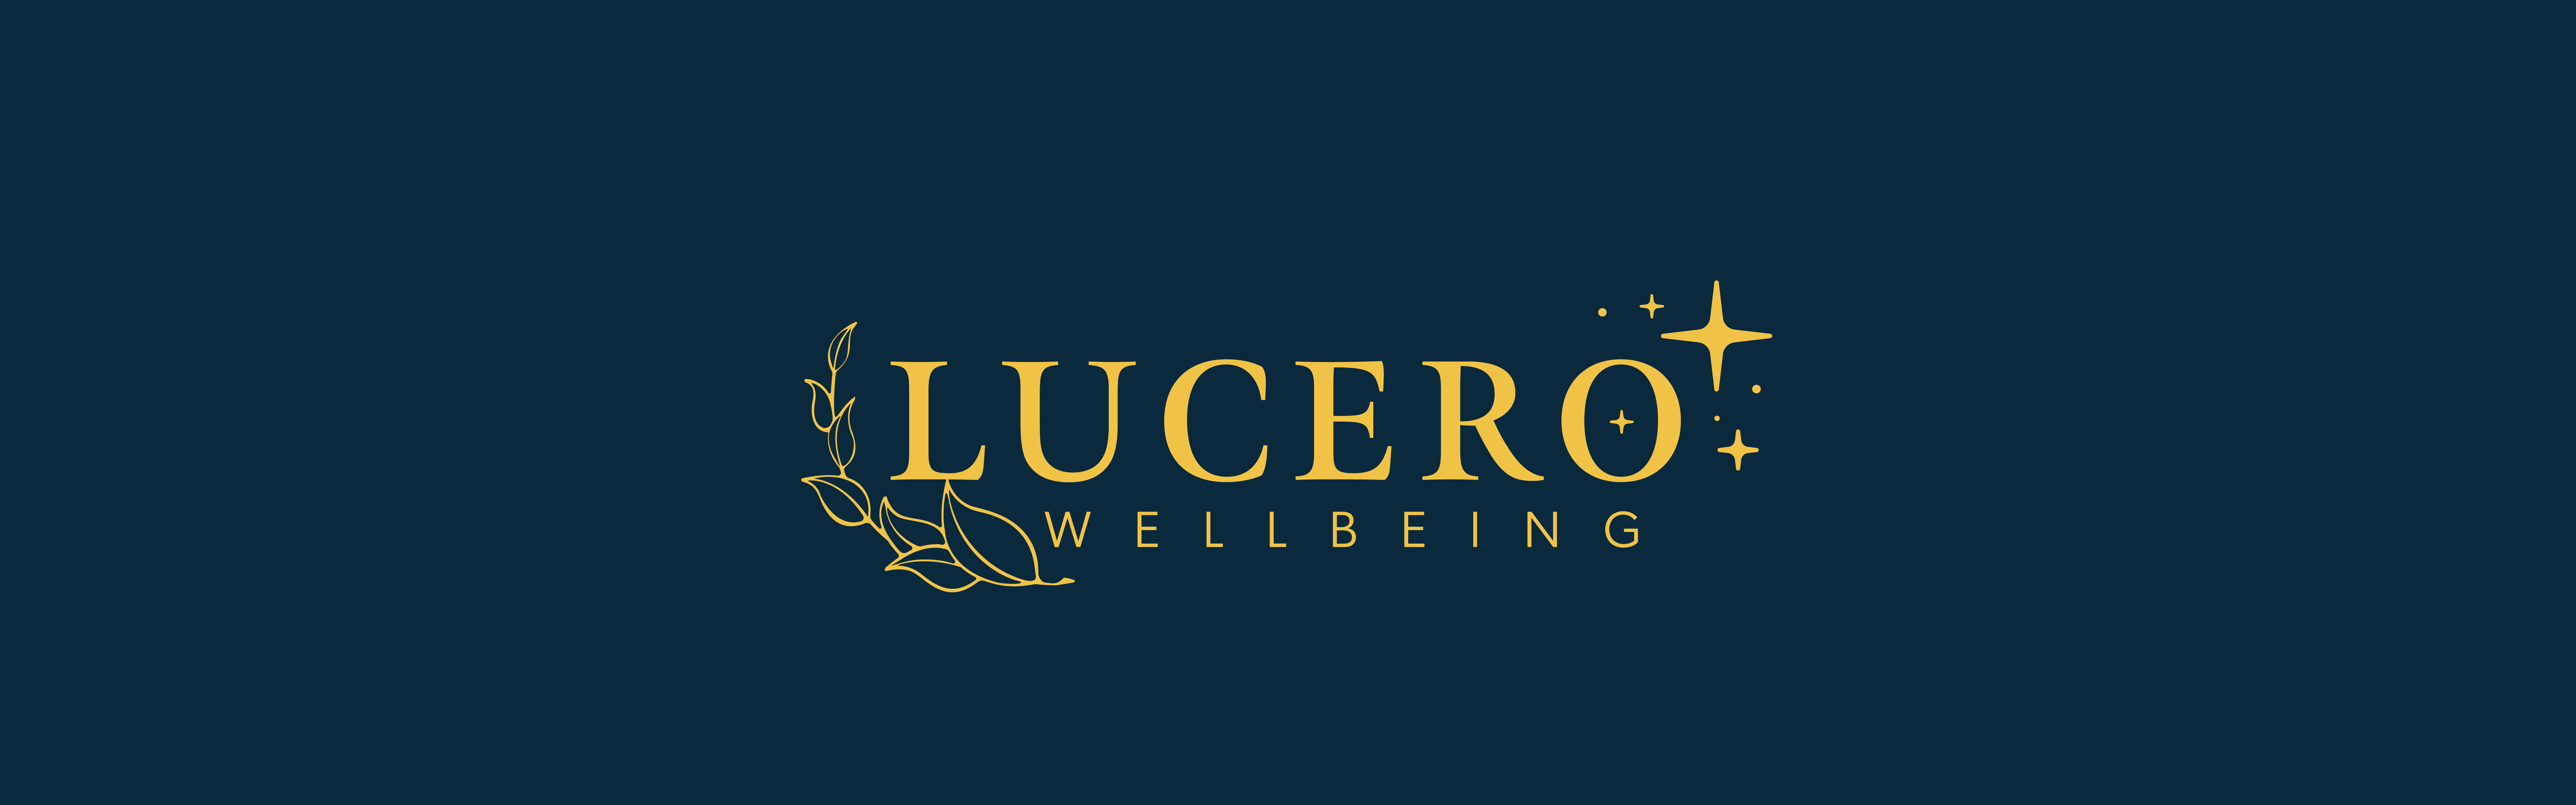 This image features the logo for "Lucero Wellbeing" set against a dark blue background. The text is in a serif font, primarily in a gold color, with a decorative leaf element on the